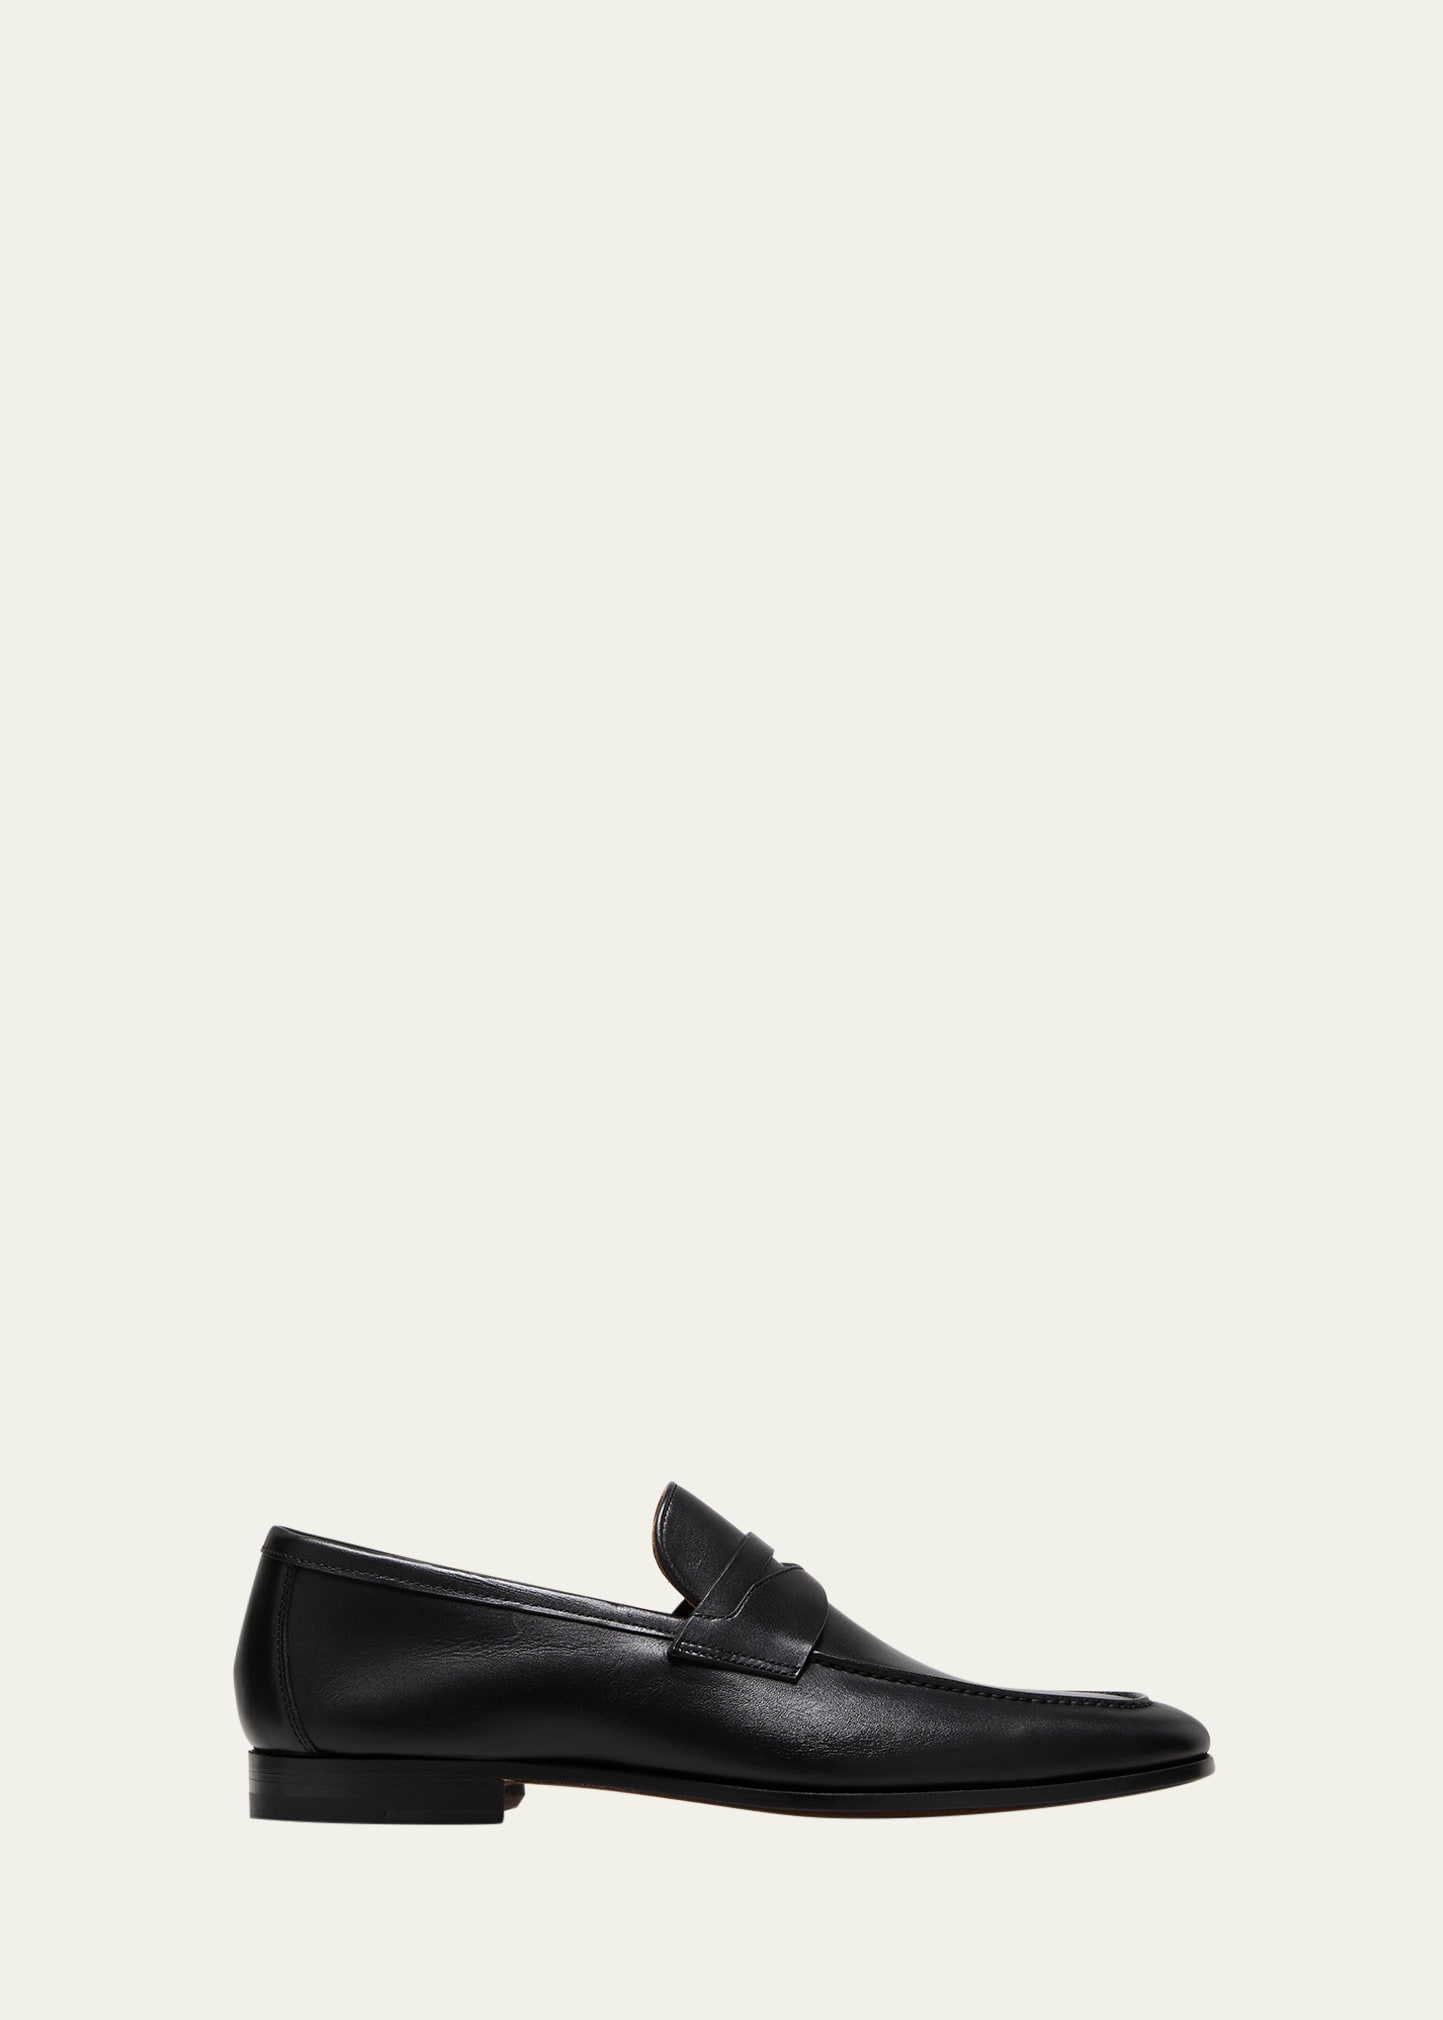 Magnanni Men's Sasso Leather Penny Loafers In Black